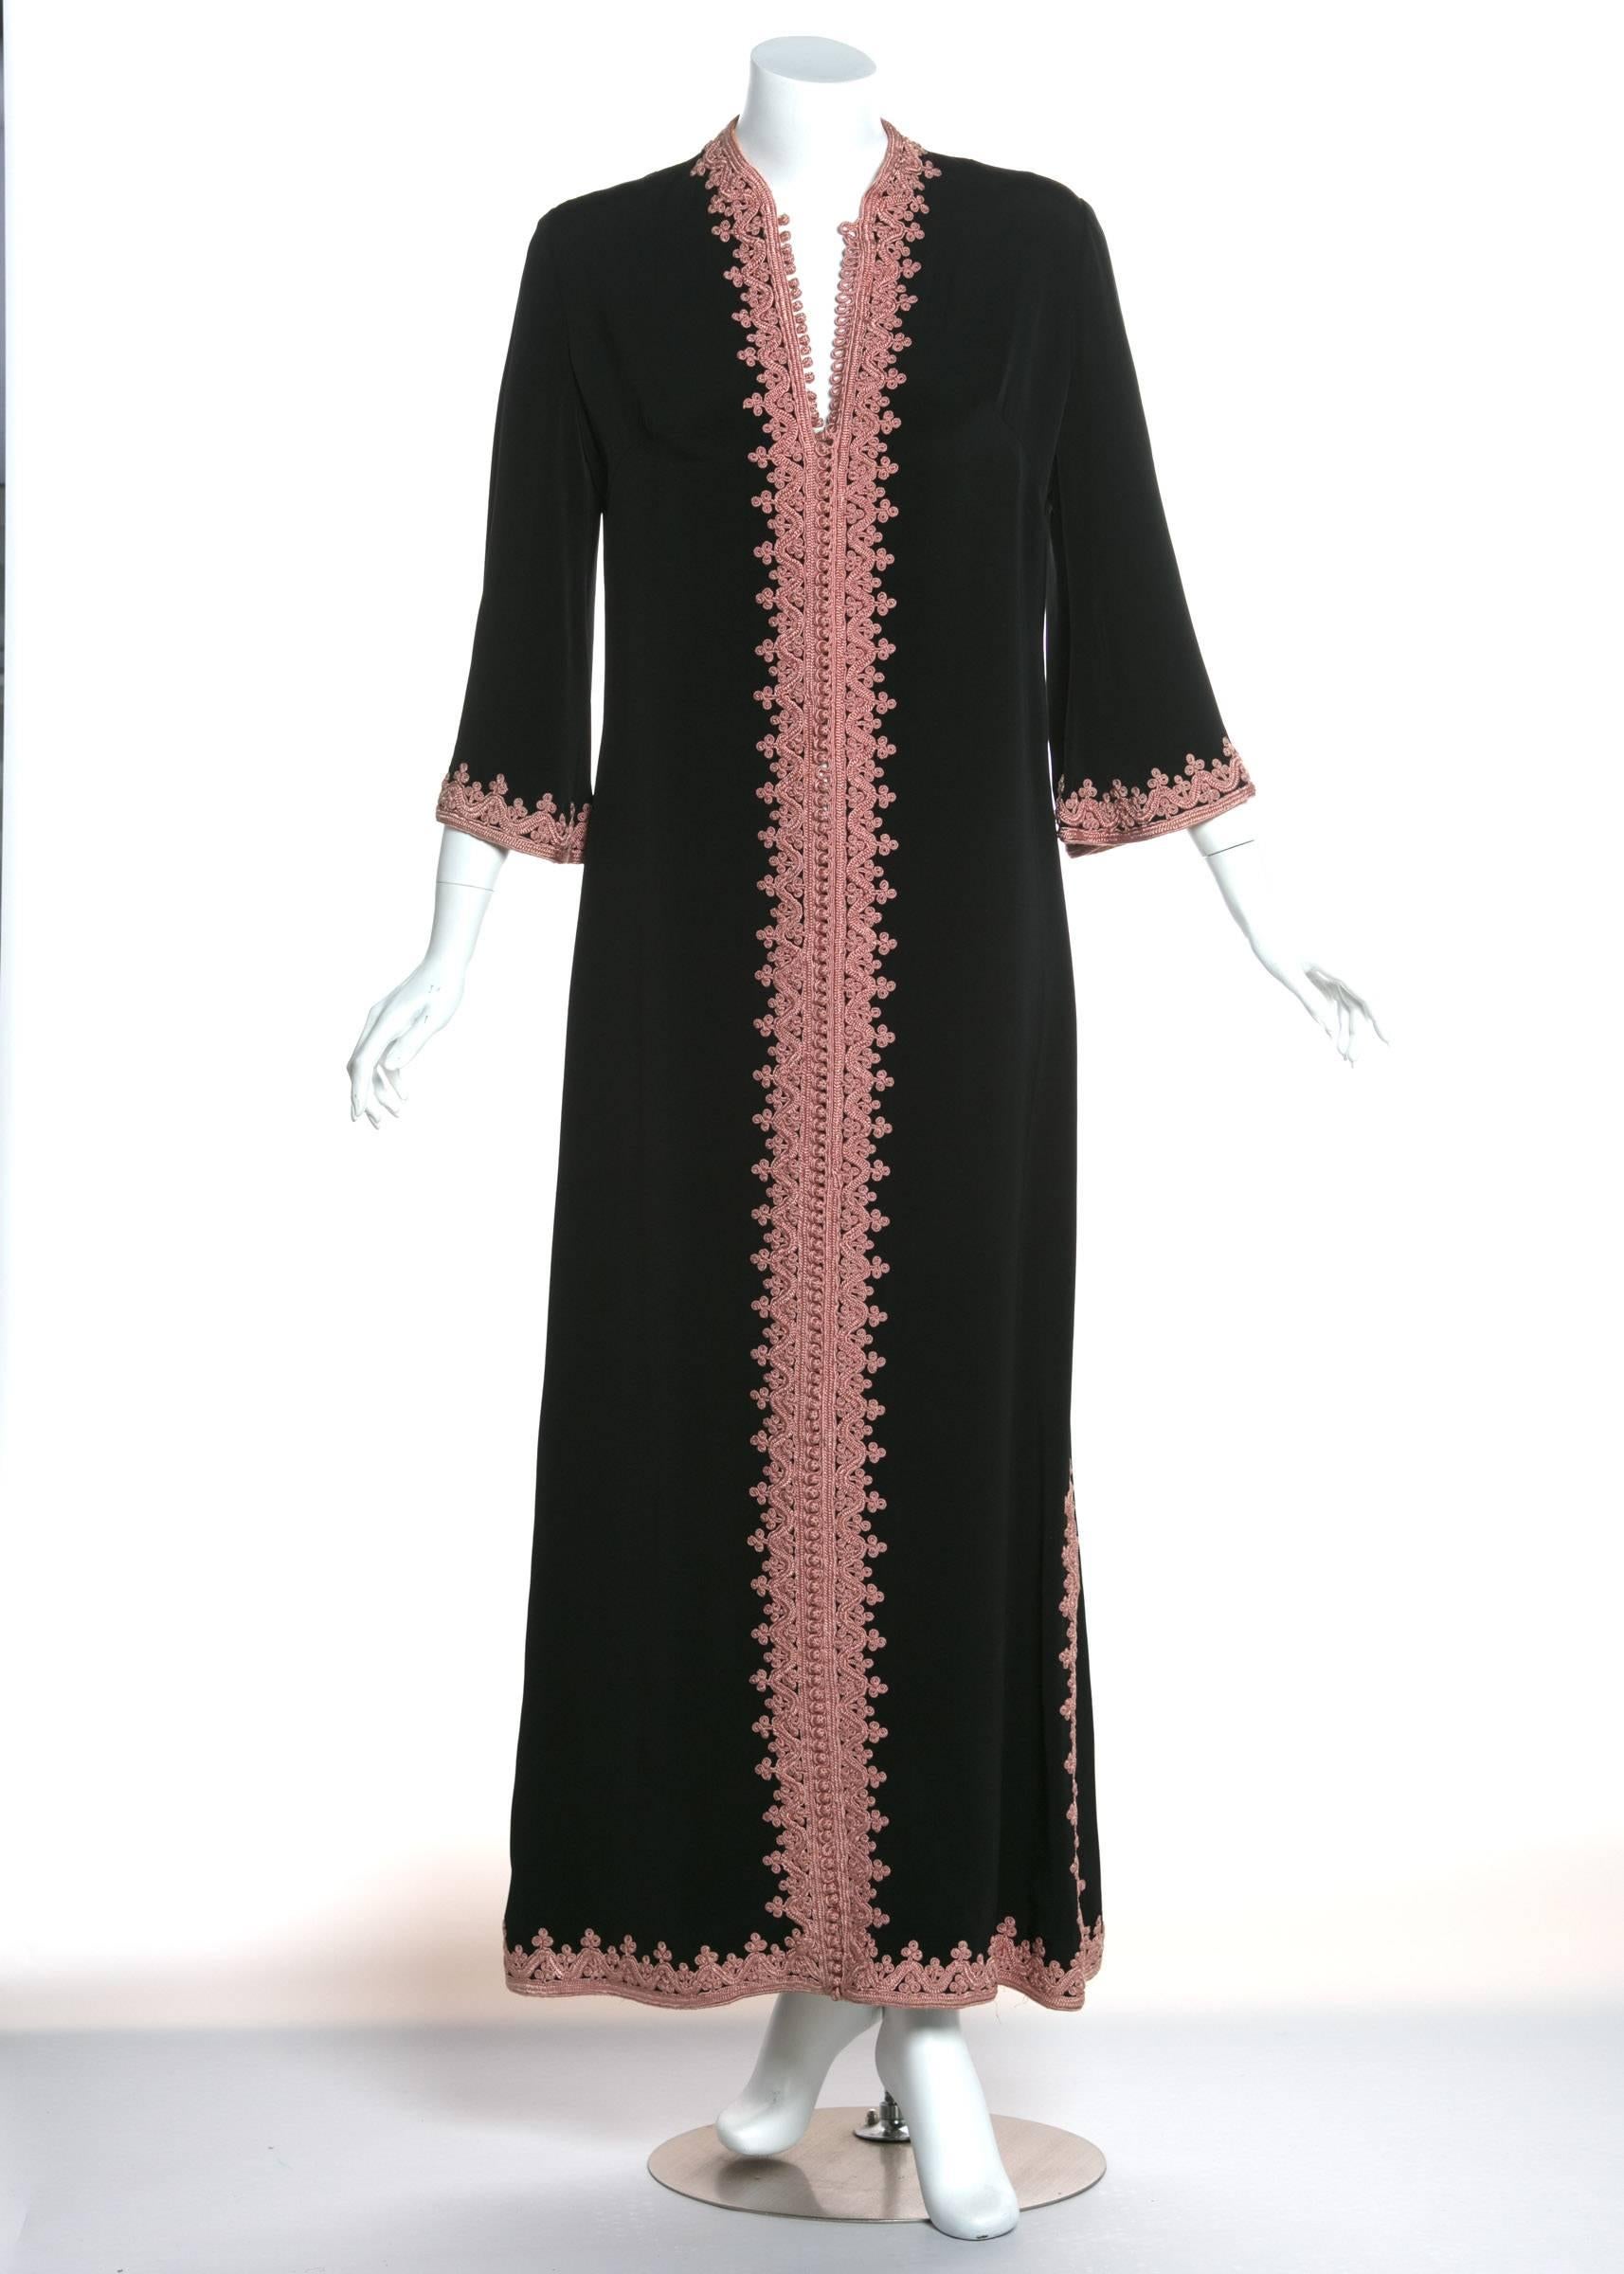 This luxurious caftan was made in Morocco during the1970s, but is origins date back thousands of years and span the globe. The history of the caftan is a bit uncertain. It is believed to have originated from Turkish culture but appears in many